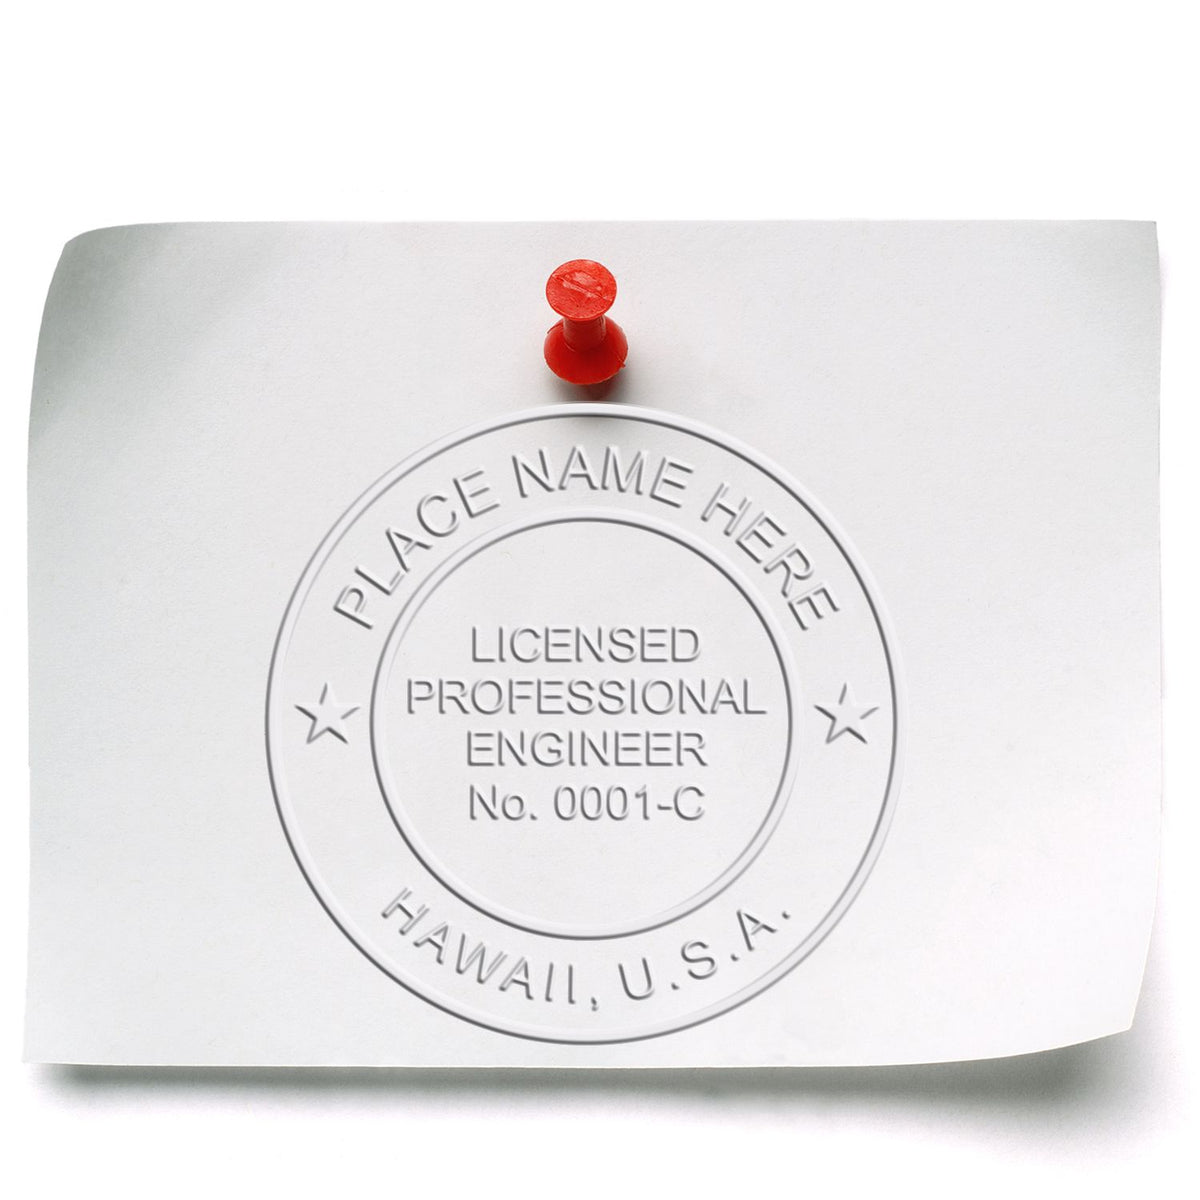 An alternative view of the Hybrid Hawaii Engineer Seal stamped on a sheet of paper showing the image in use